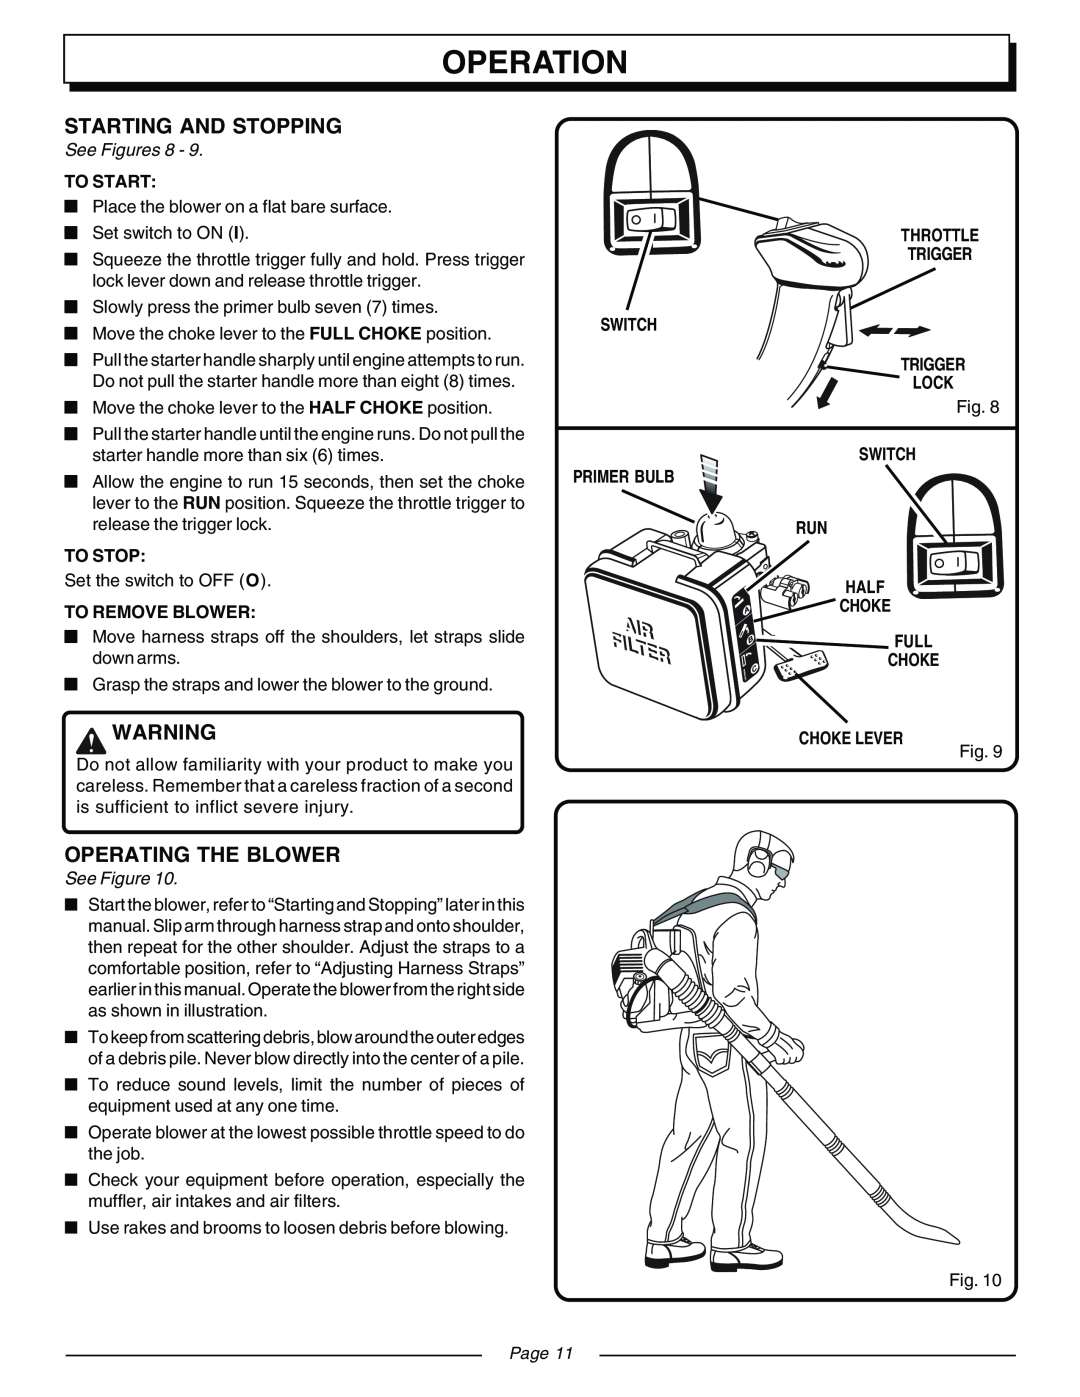 Homelite UT08570 Filteri, Operation, Airir, See Figures 8, To Start, To Stop, To Remove Blower, Switch Primer Bulb, Page 